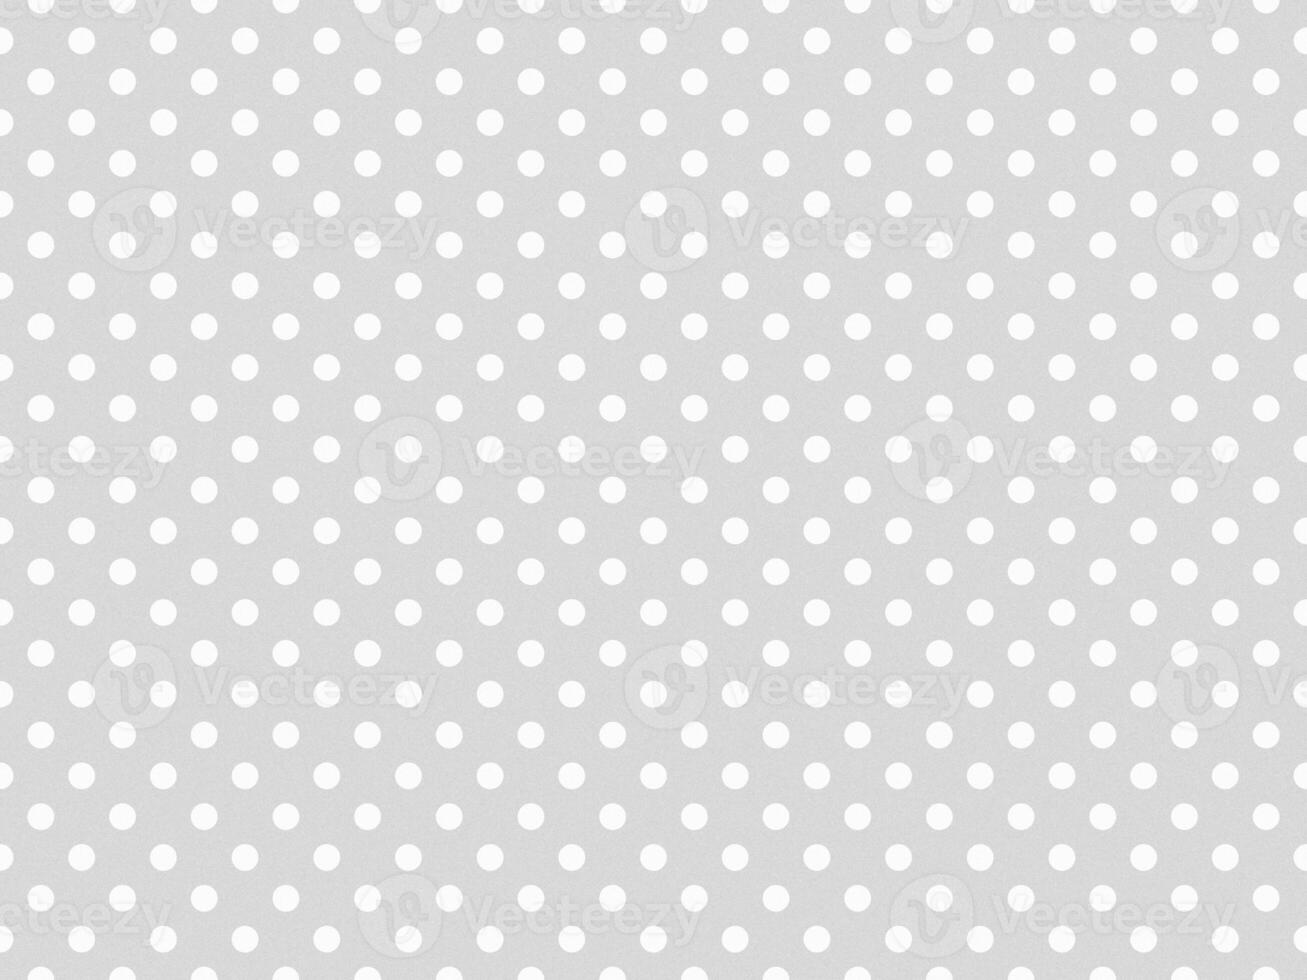 texturised white color polka dots over gainsboro grey background photo